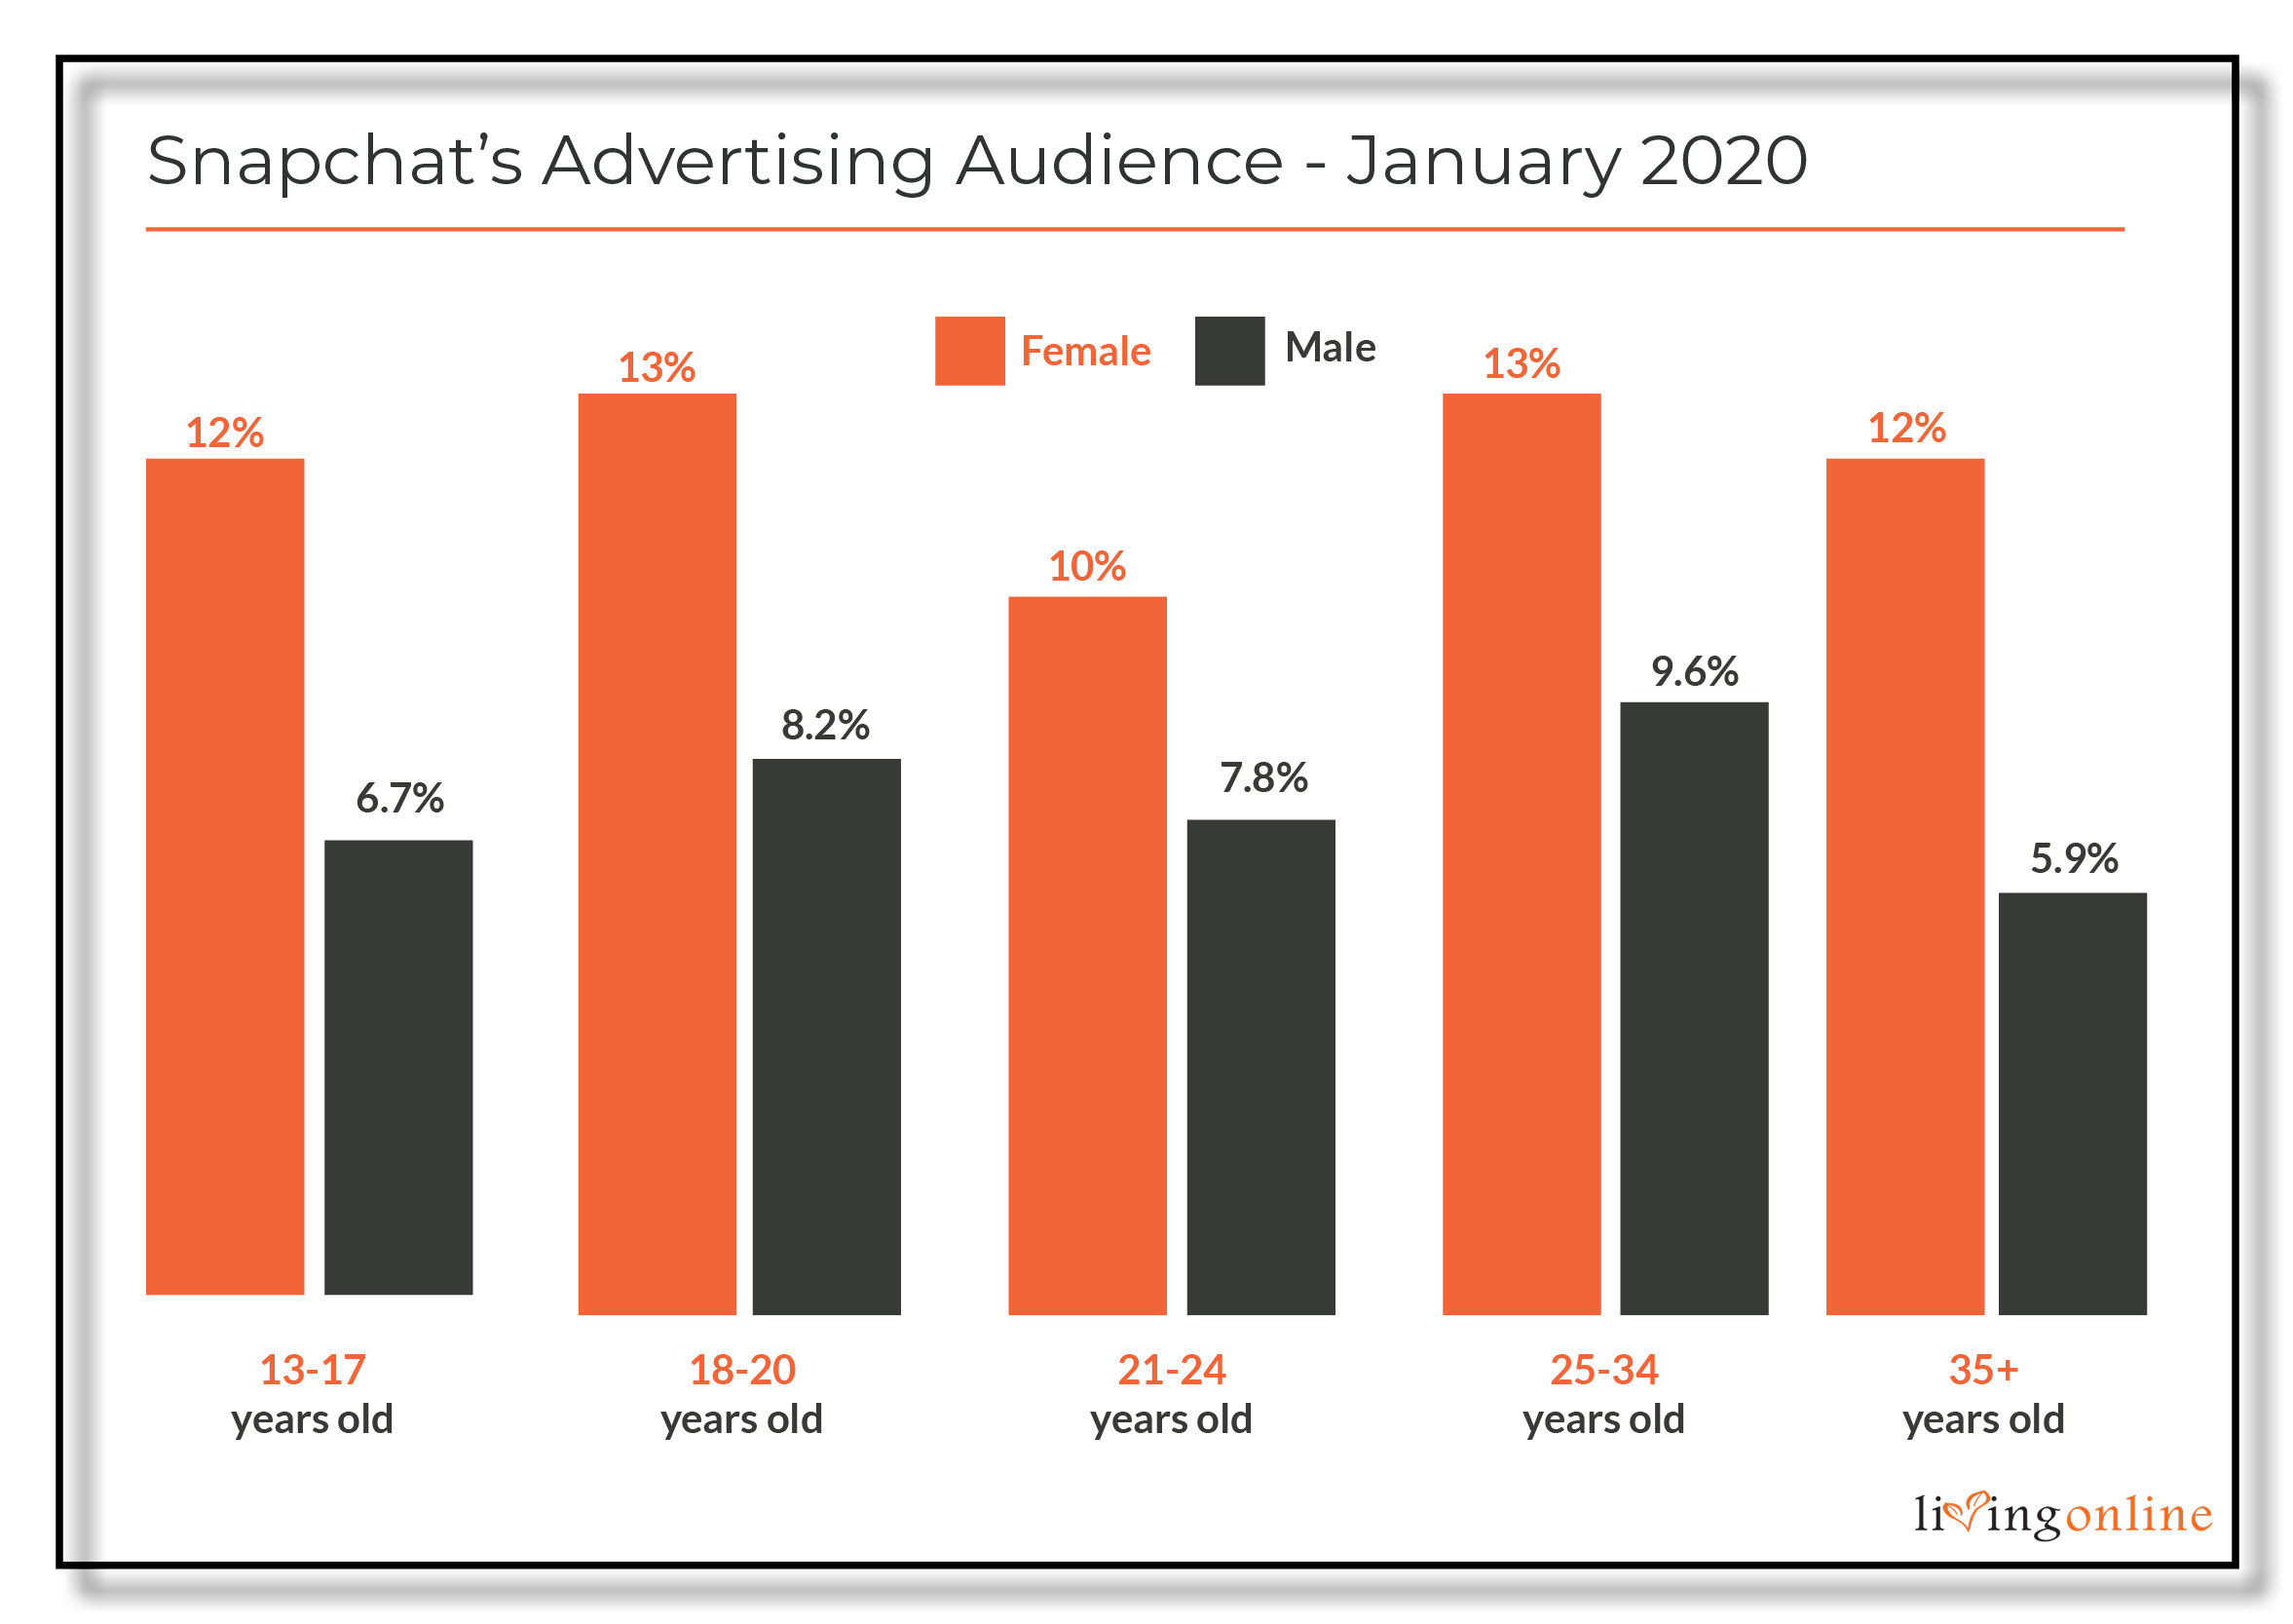 snapchat ad audience as of January 2020